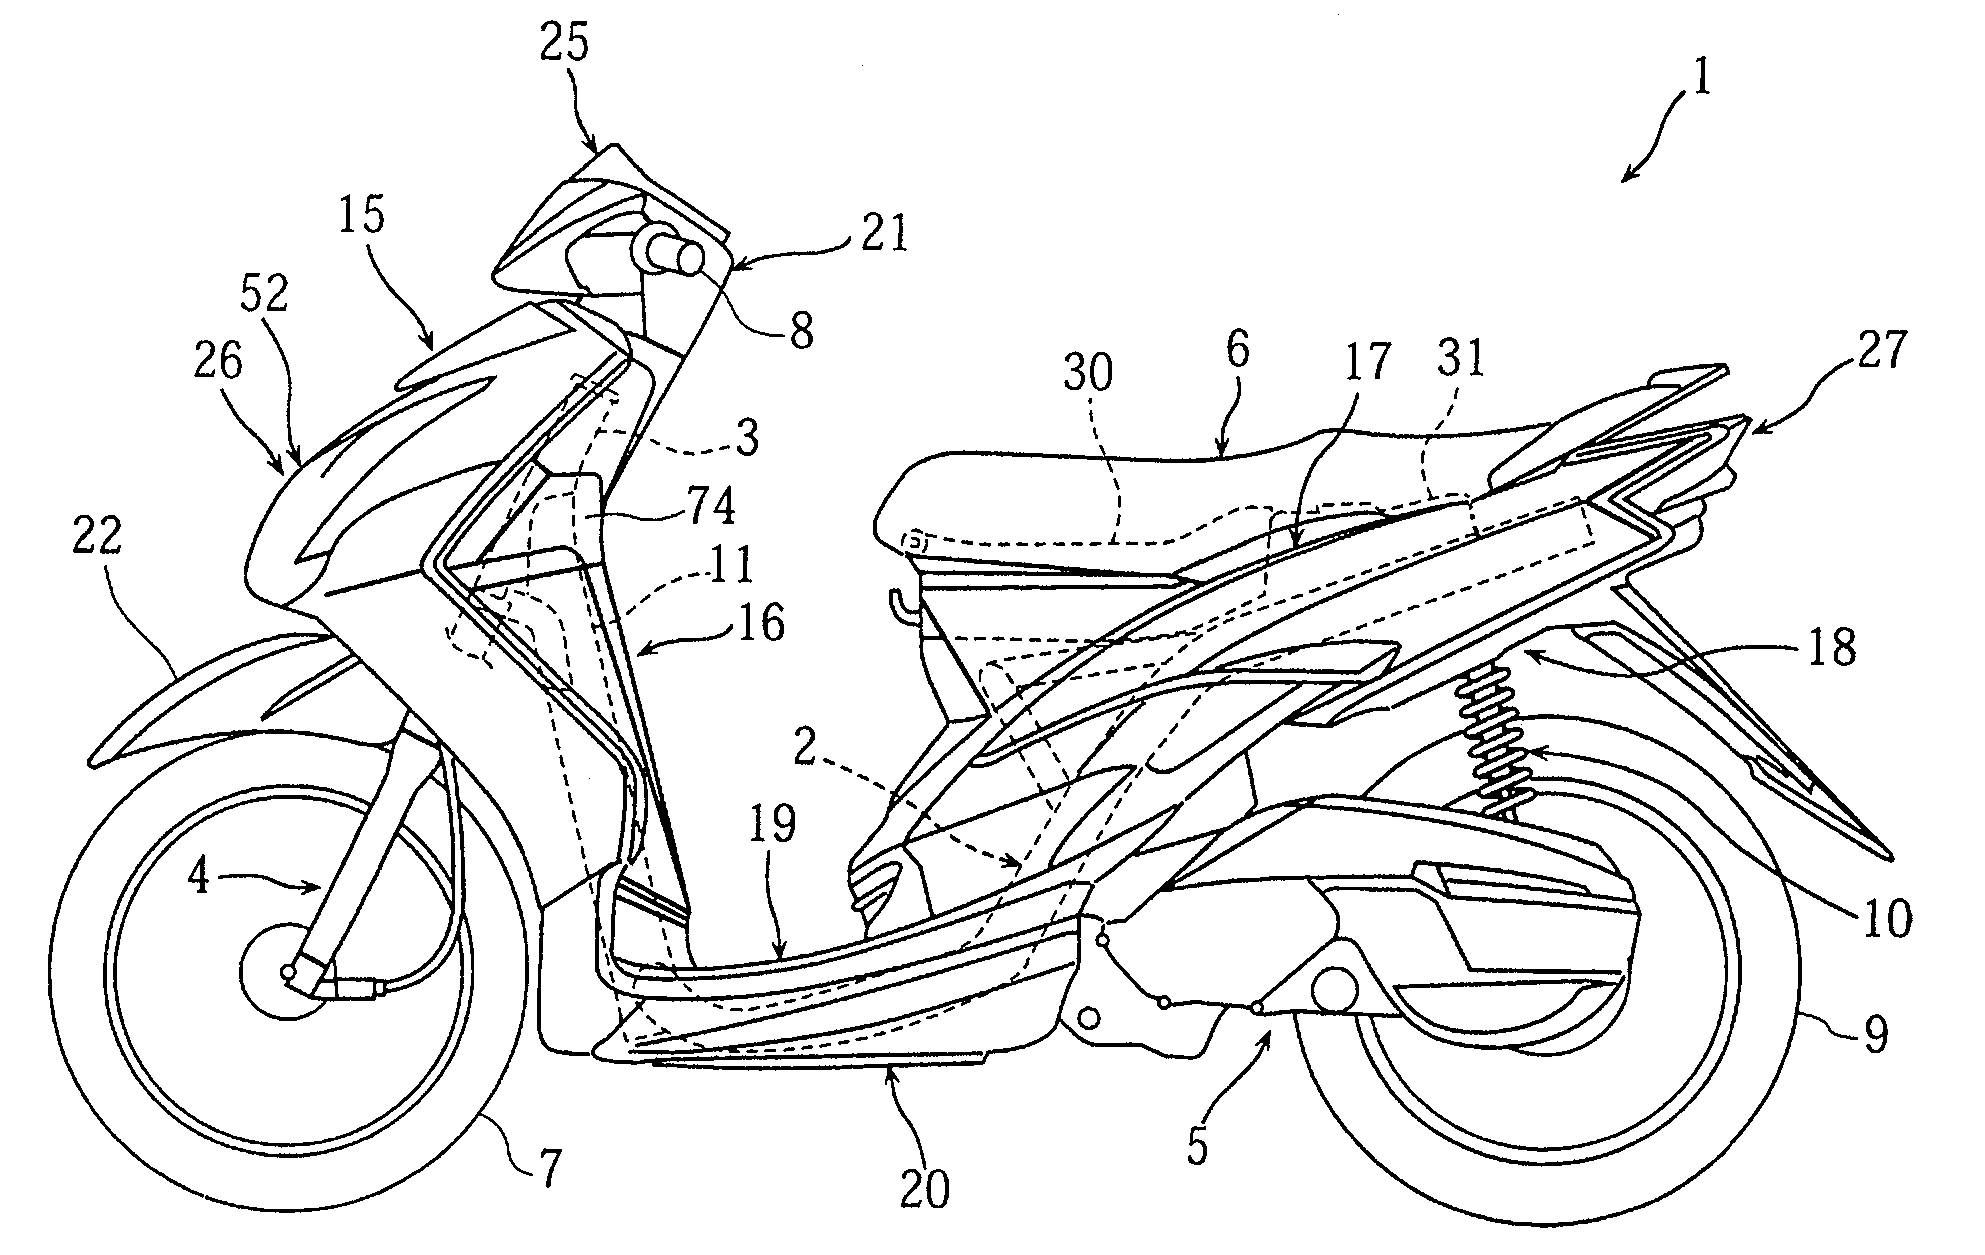 Motorcycle with storage compartment